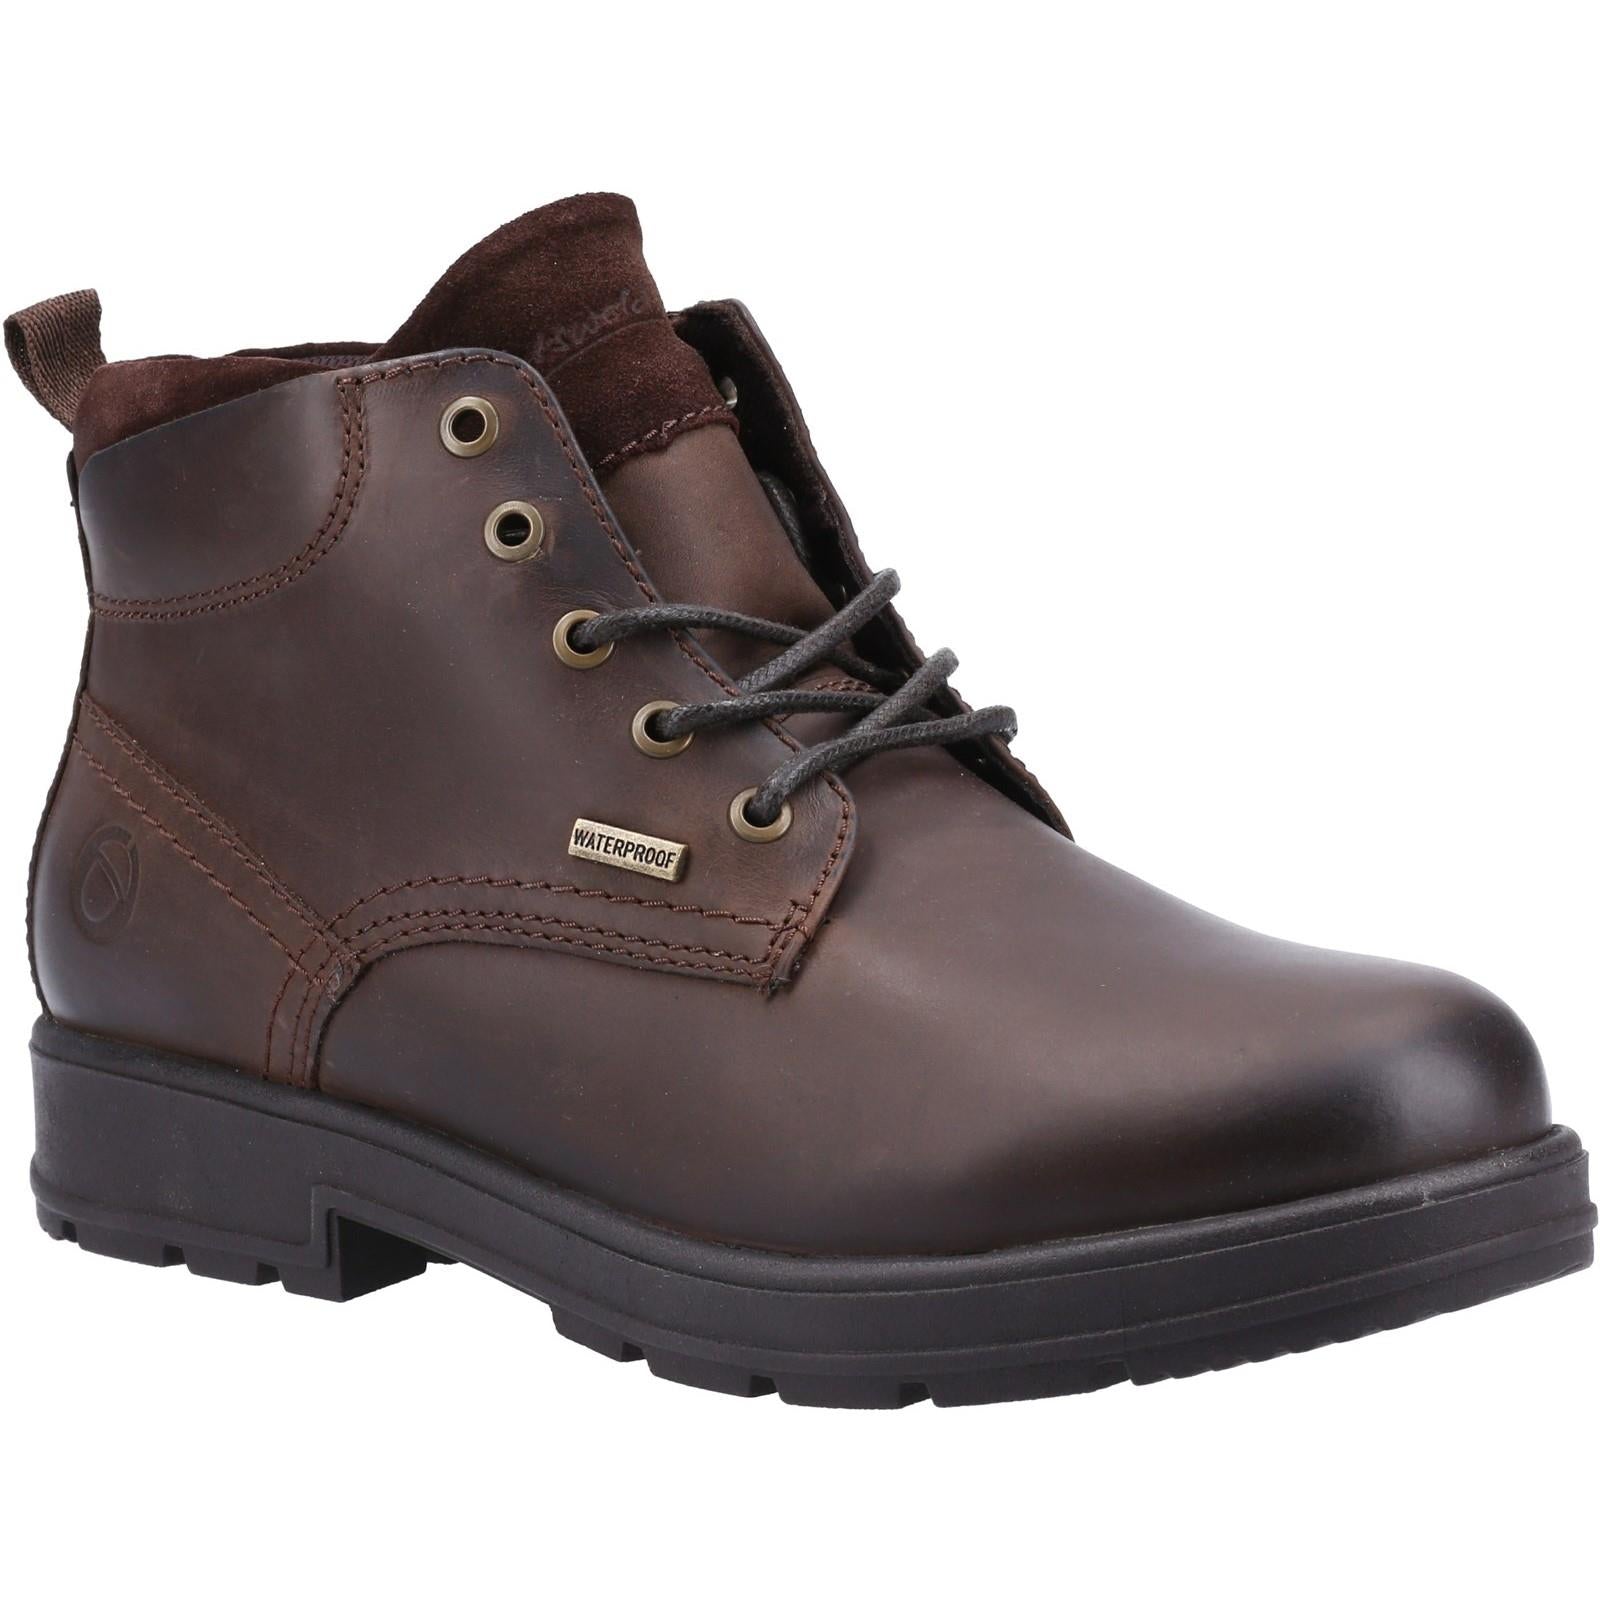 Cotswold Winson brown leather breathable waterproof lace up boots